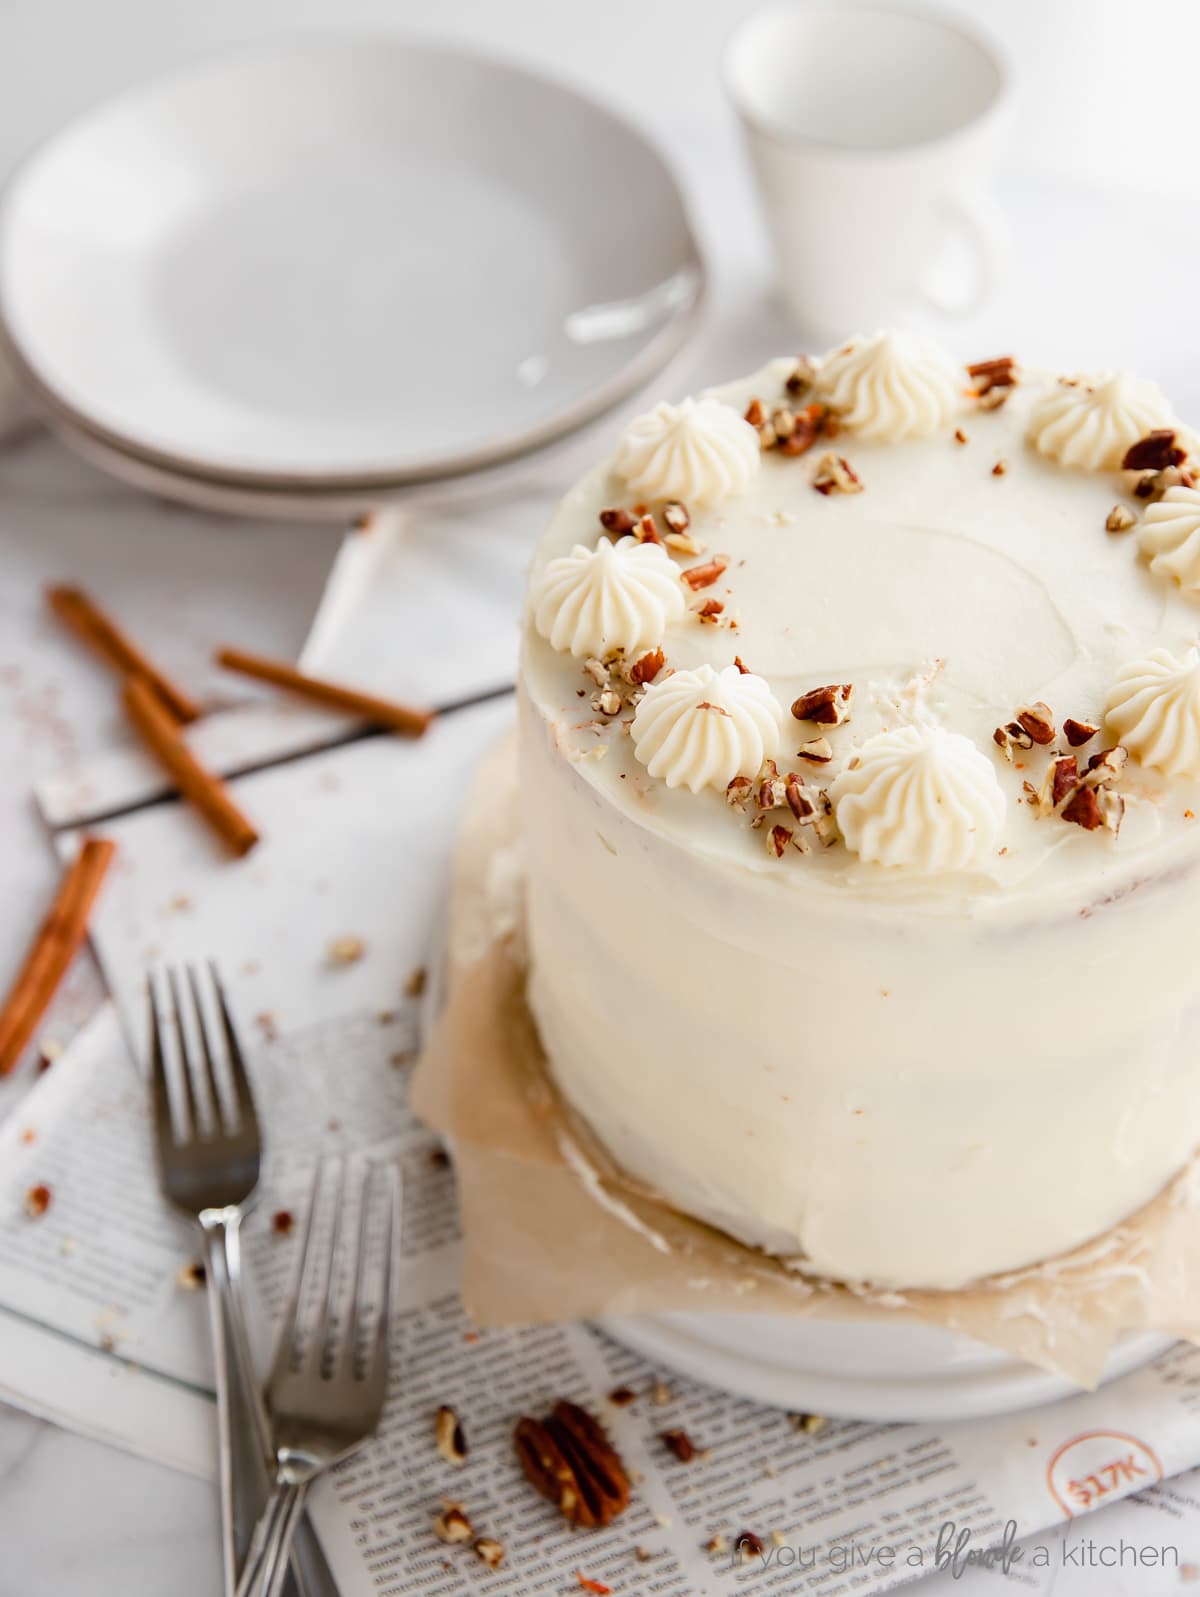 carrot cake frosted with cream cheese frosting; crushed pecans sprinkled on top of cake